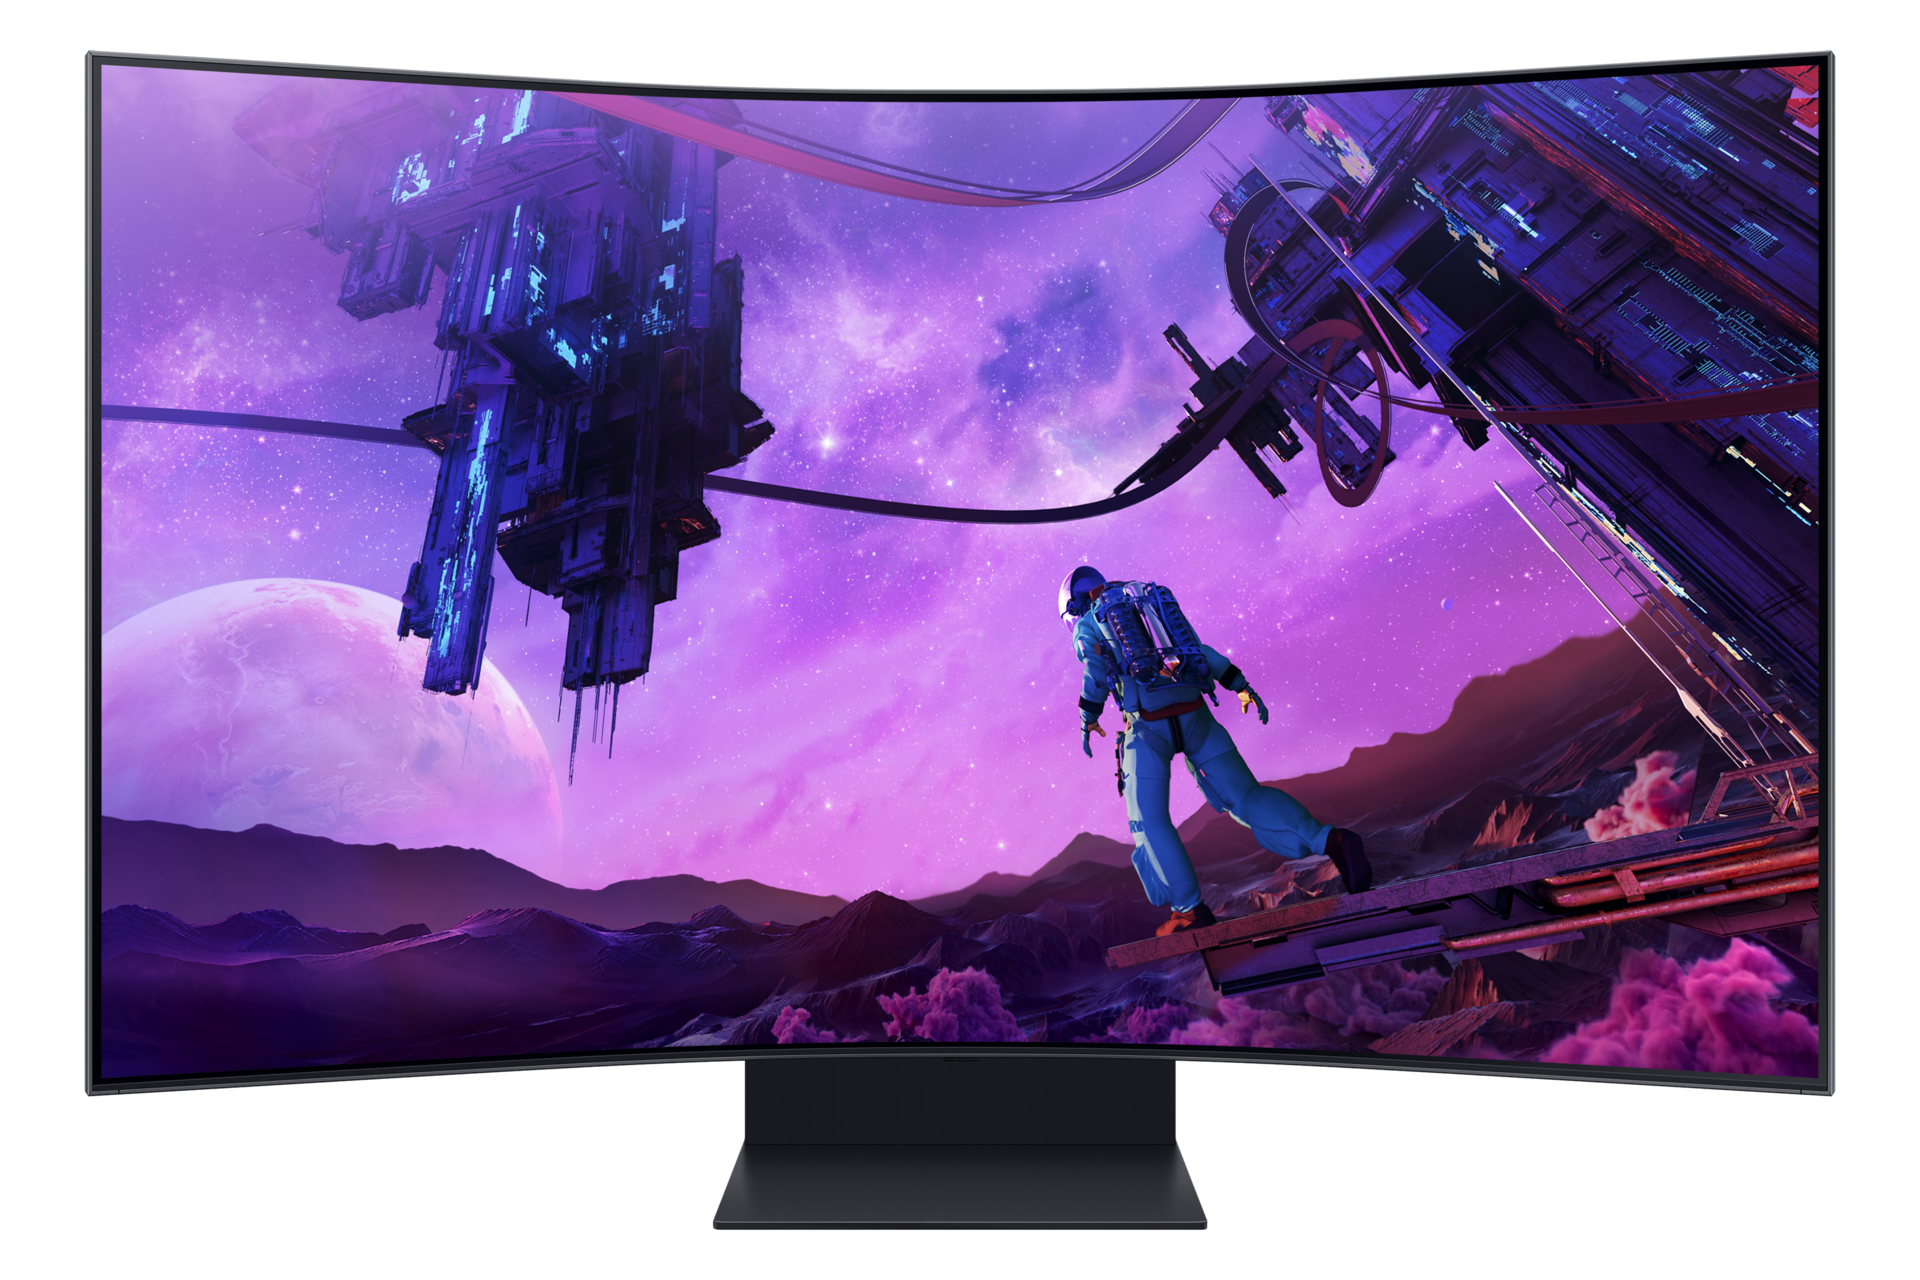 Samsung Has Launched The Odyssey Ark, A Massive 55-Inch Curved